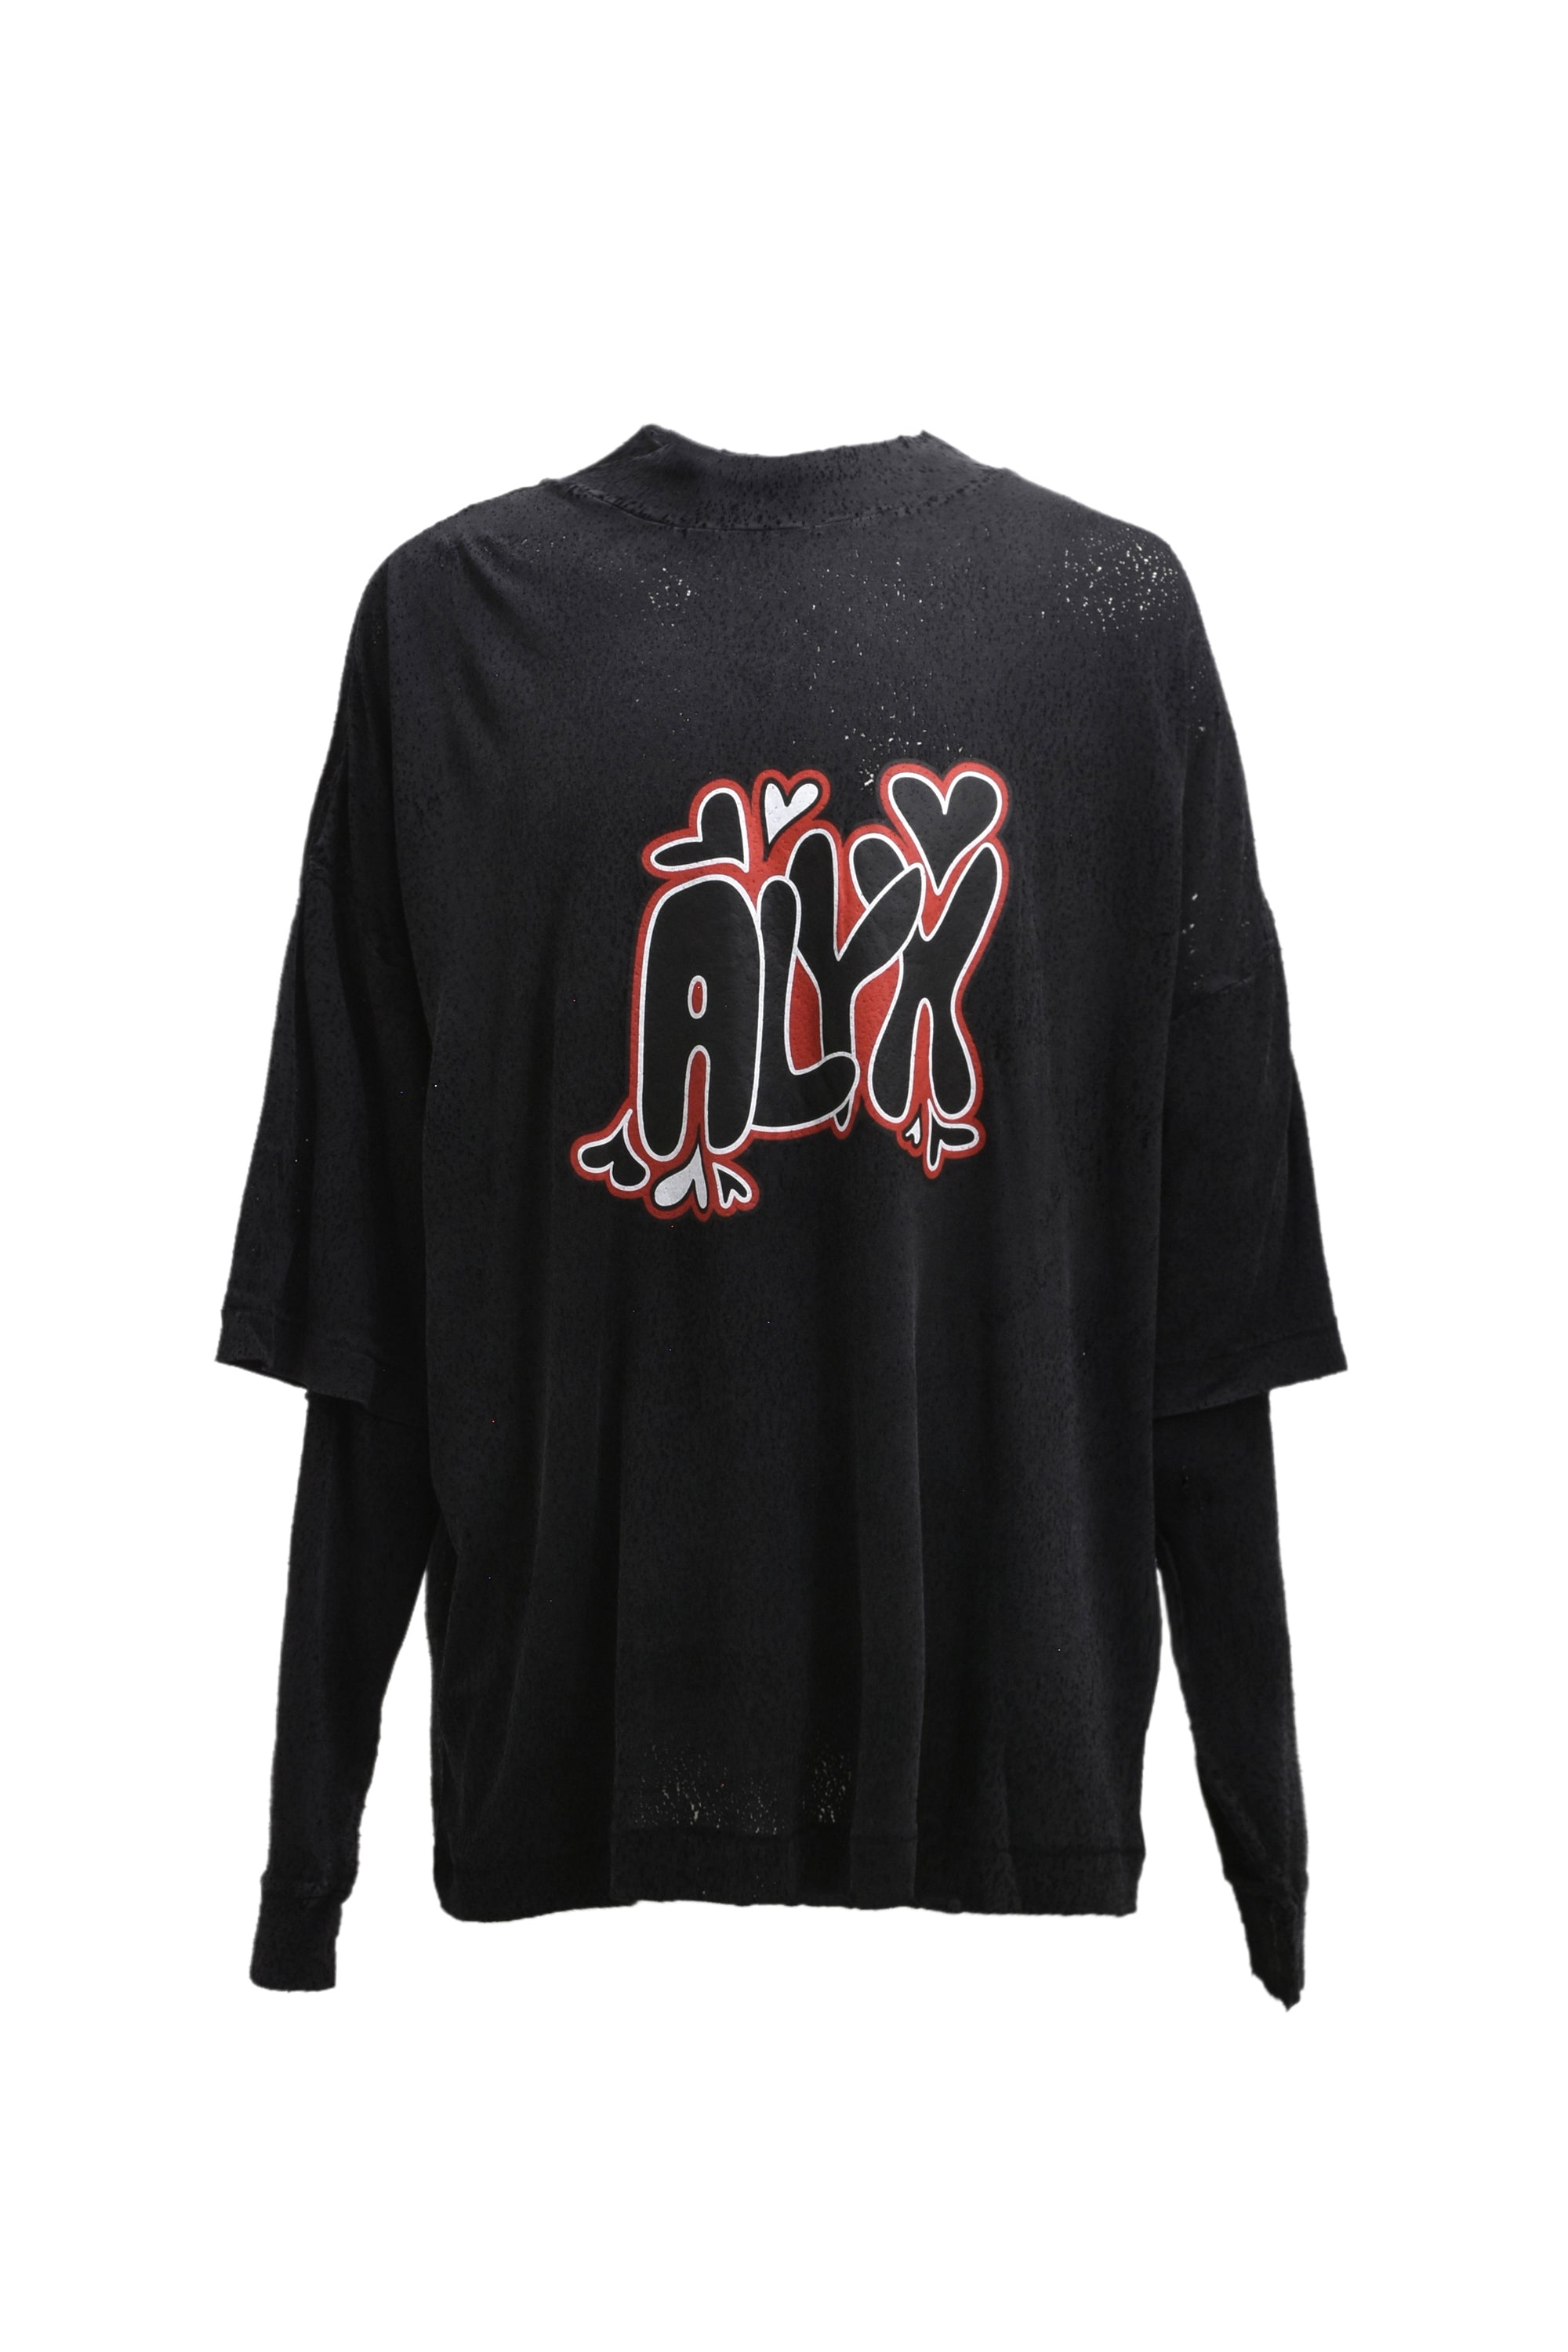 1017 ALYX 9SM アリクスSS24 DOUBLE SLEEVE NEEDLE PUNCH GRAPHIC T 